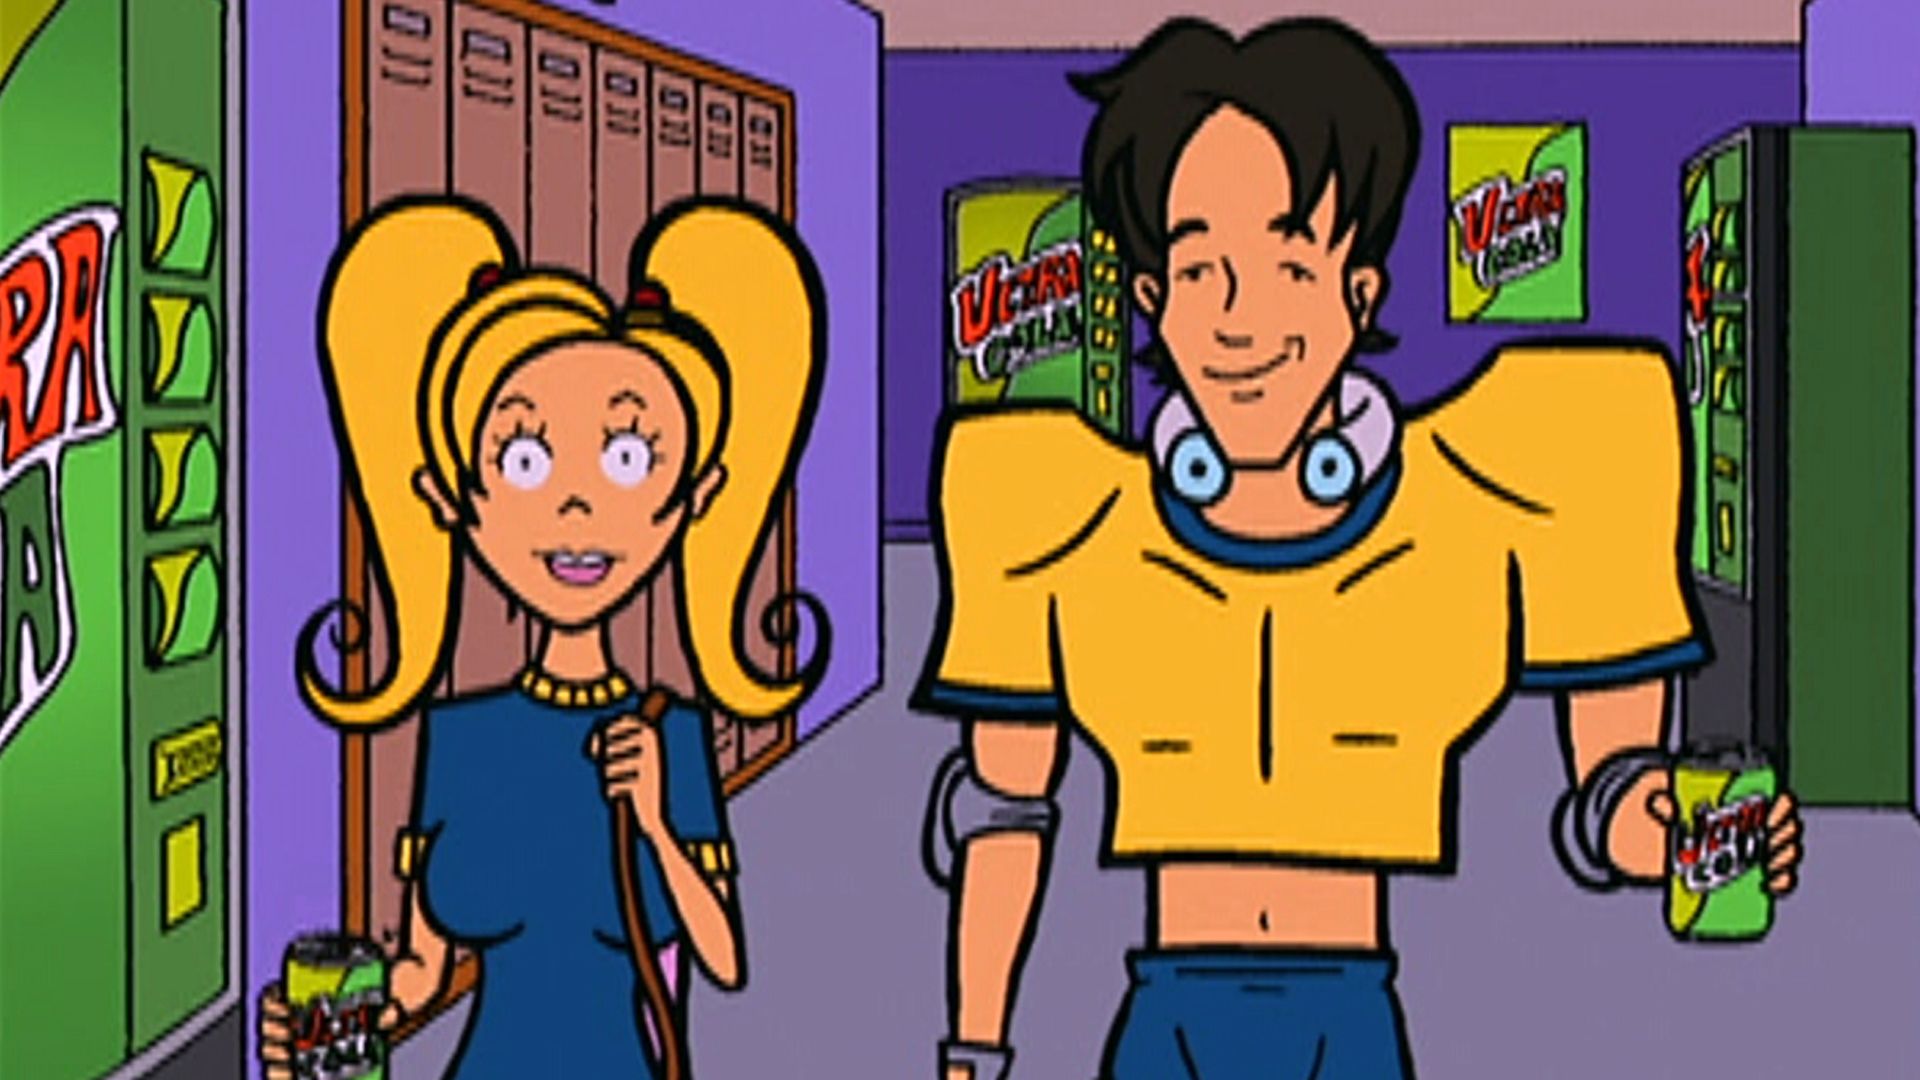 A cheerleader and a football player, Kevin and Brittany, stand in the school hallway with soda cans in their hands. 